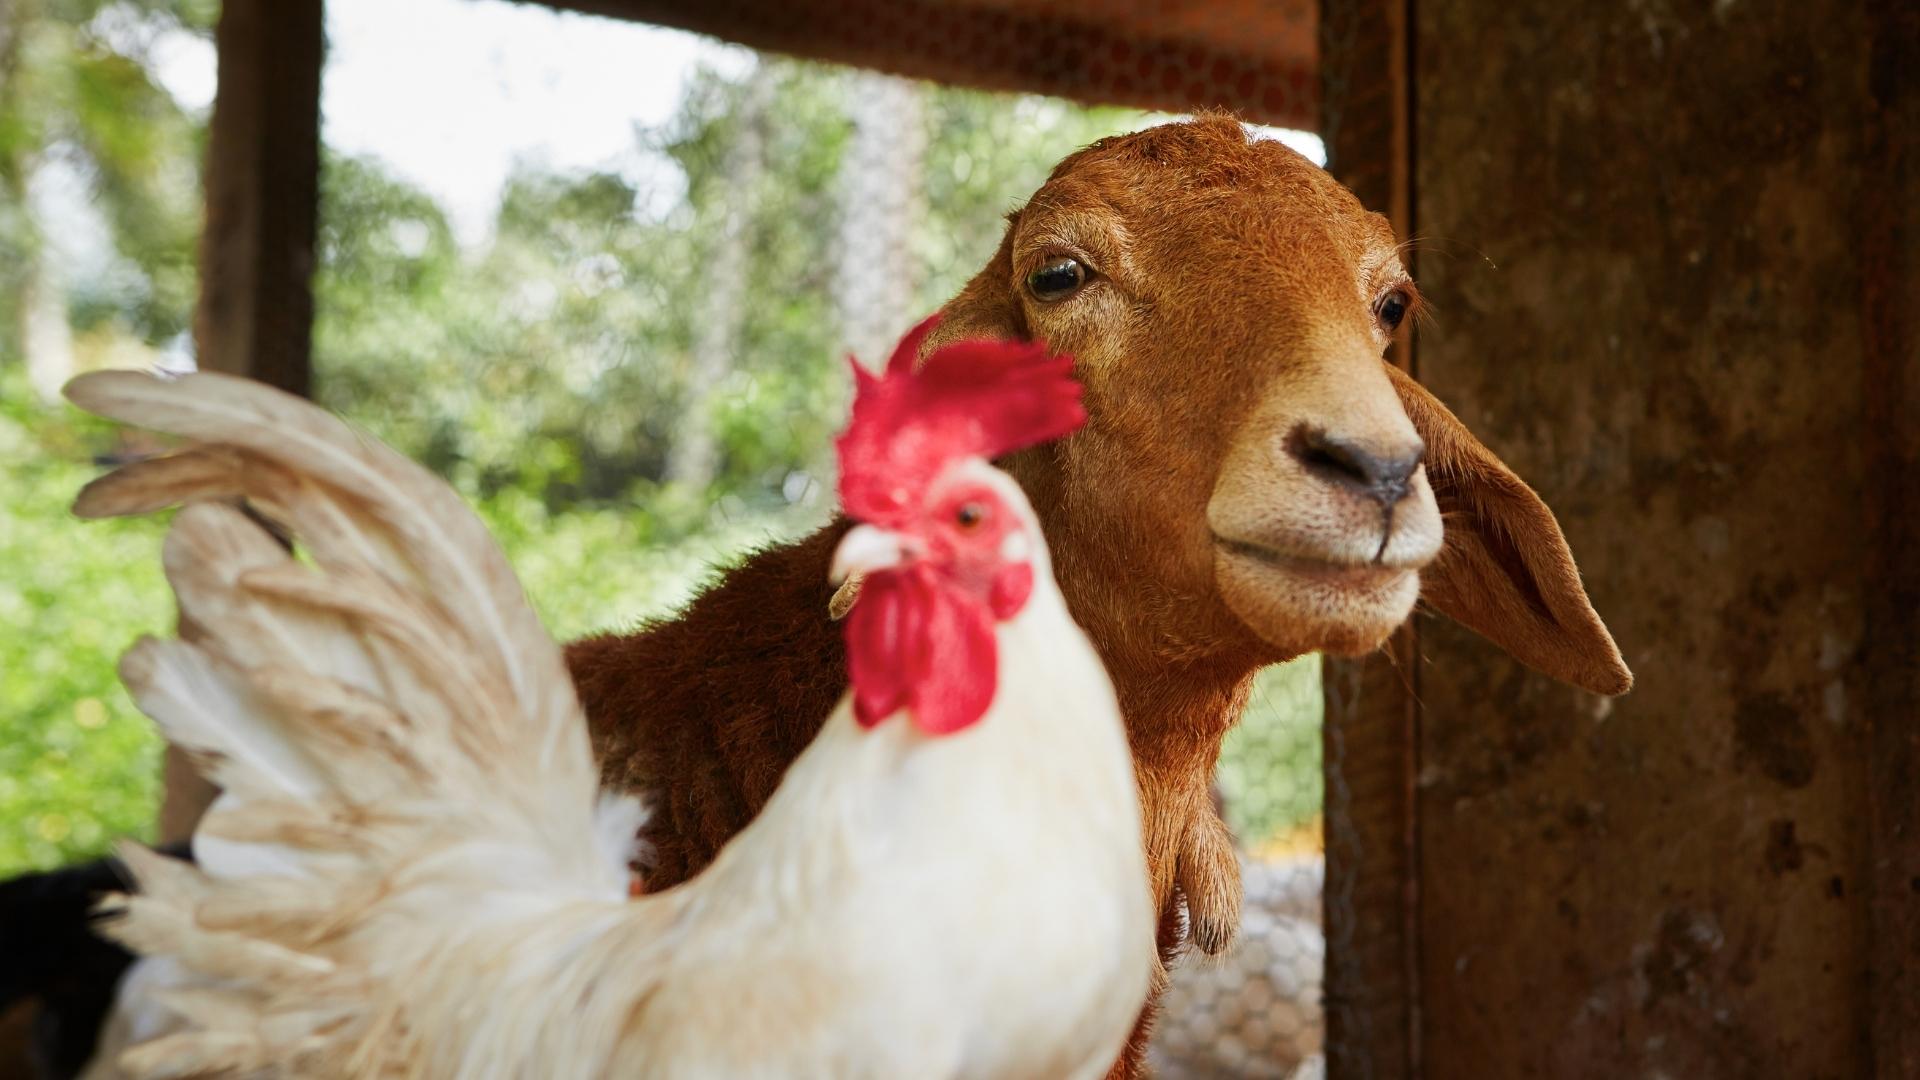 A picture of a goat and a rooster next to each other with a chicken wire fence in the background.